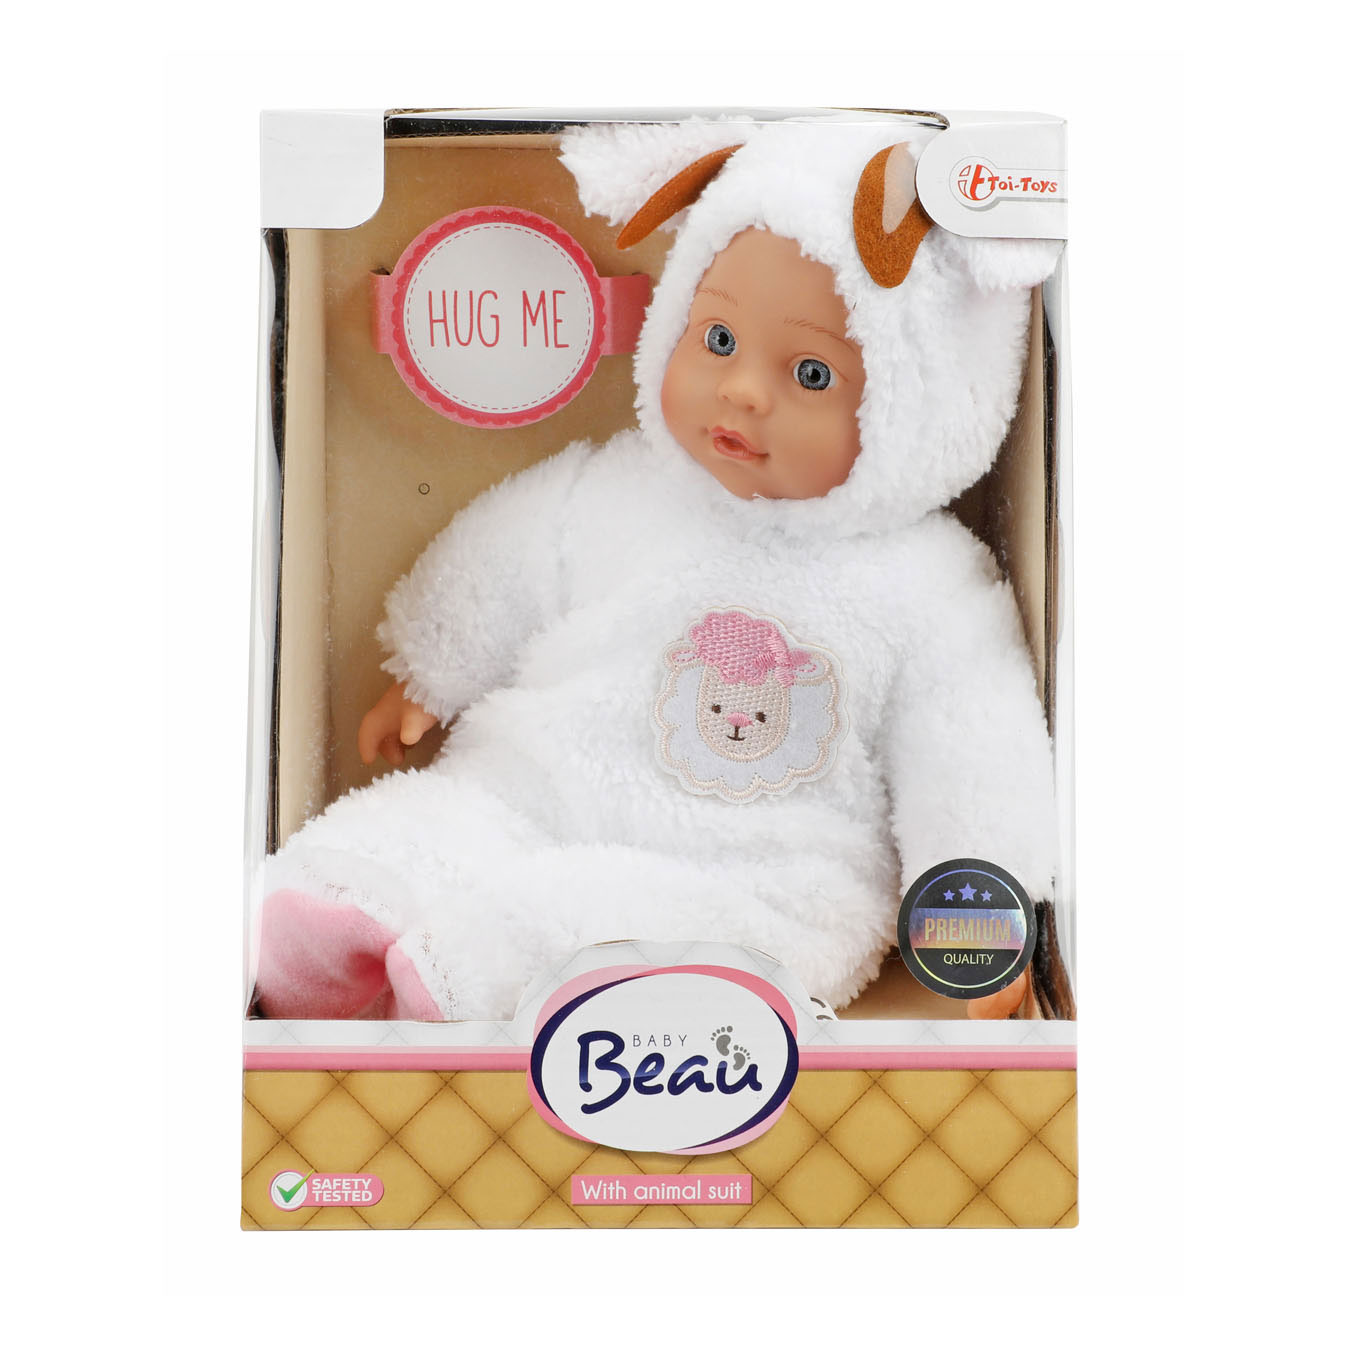 Baby Beau Baby doll en Costume d'Animal Mouton